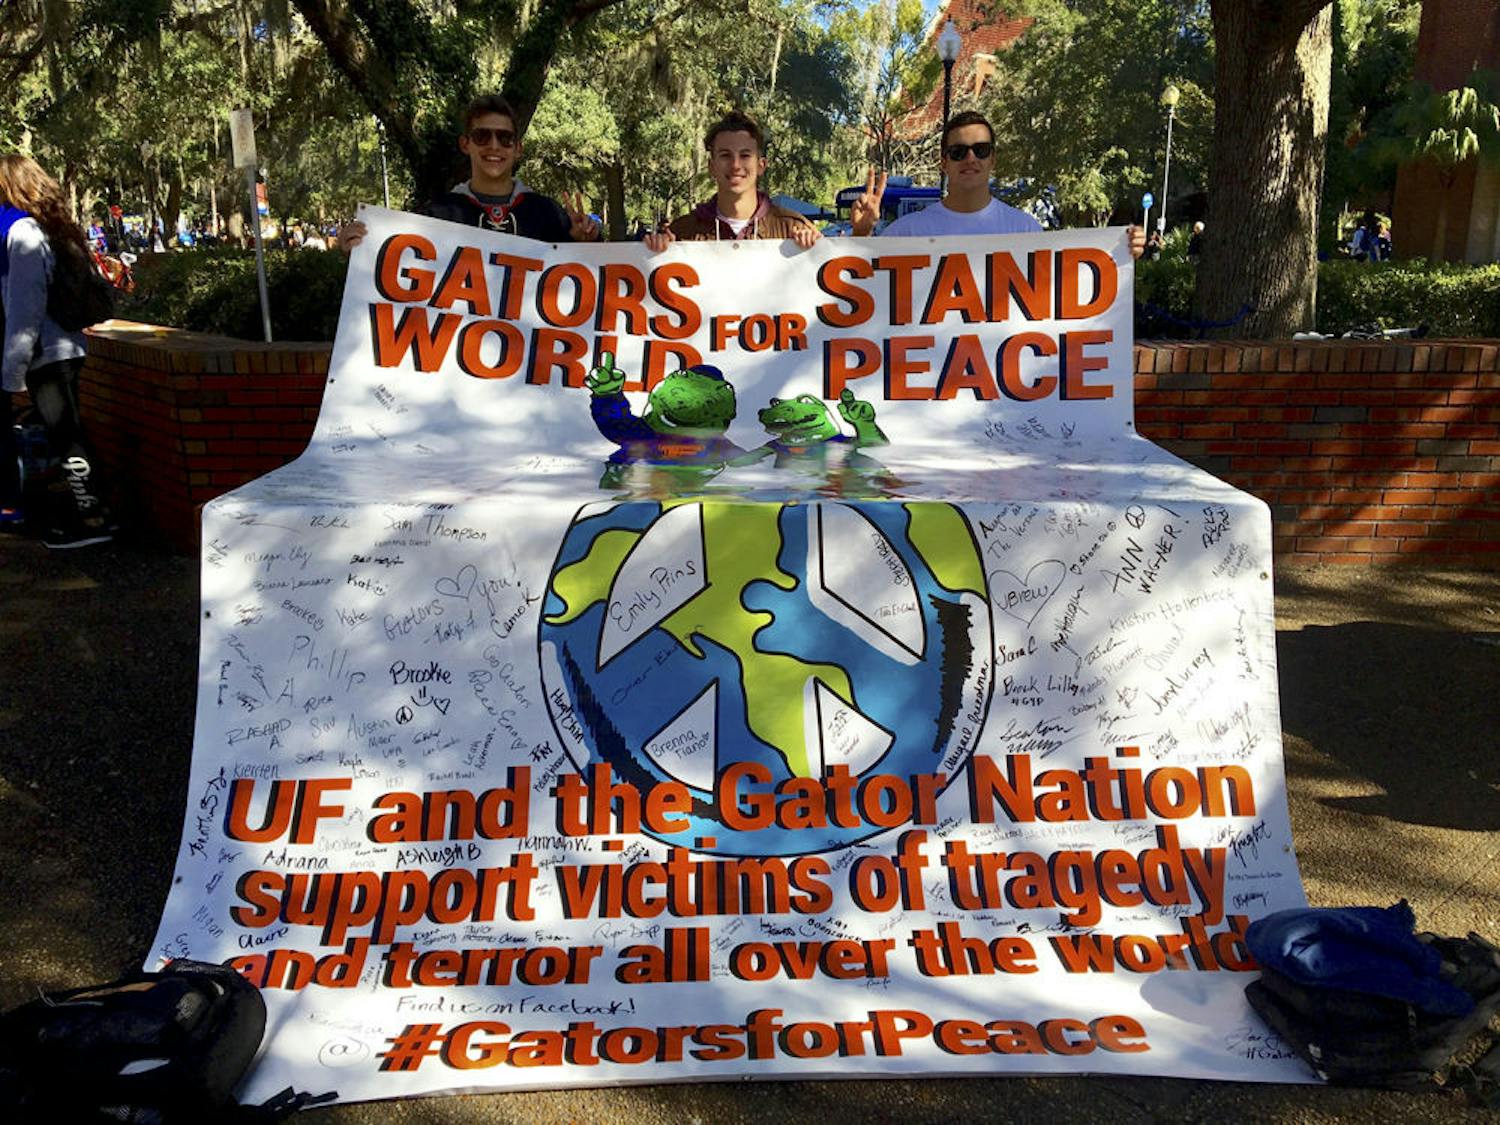 Students from Gators for Peace present their sign at Turlington Plaza on Tuesday, encouraging others to sign it in support of their cause.